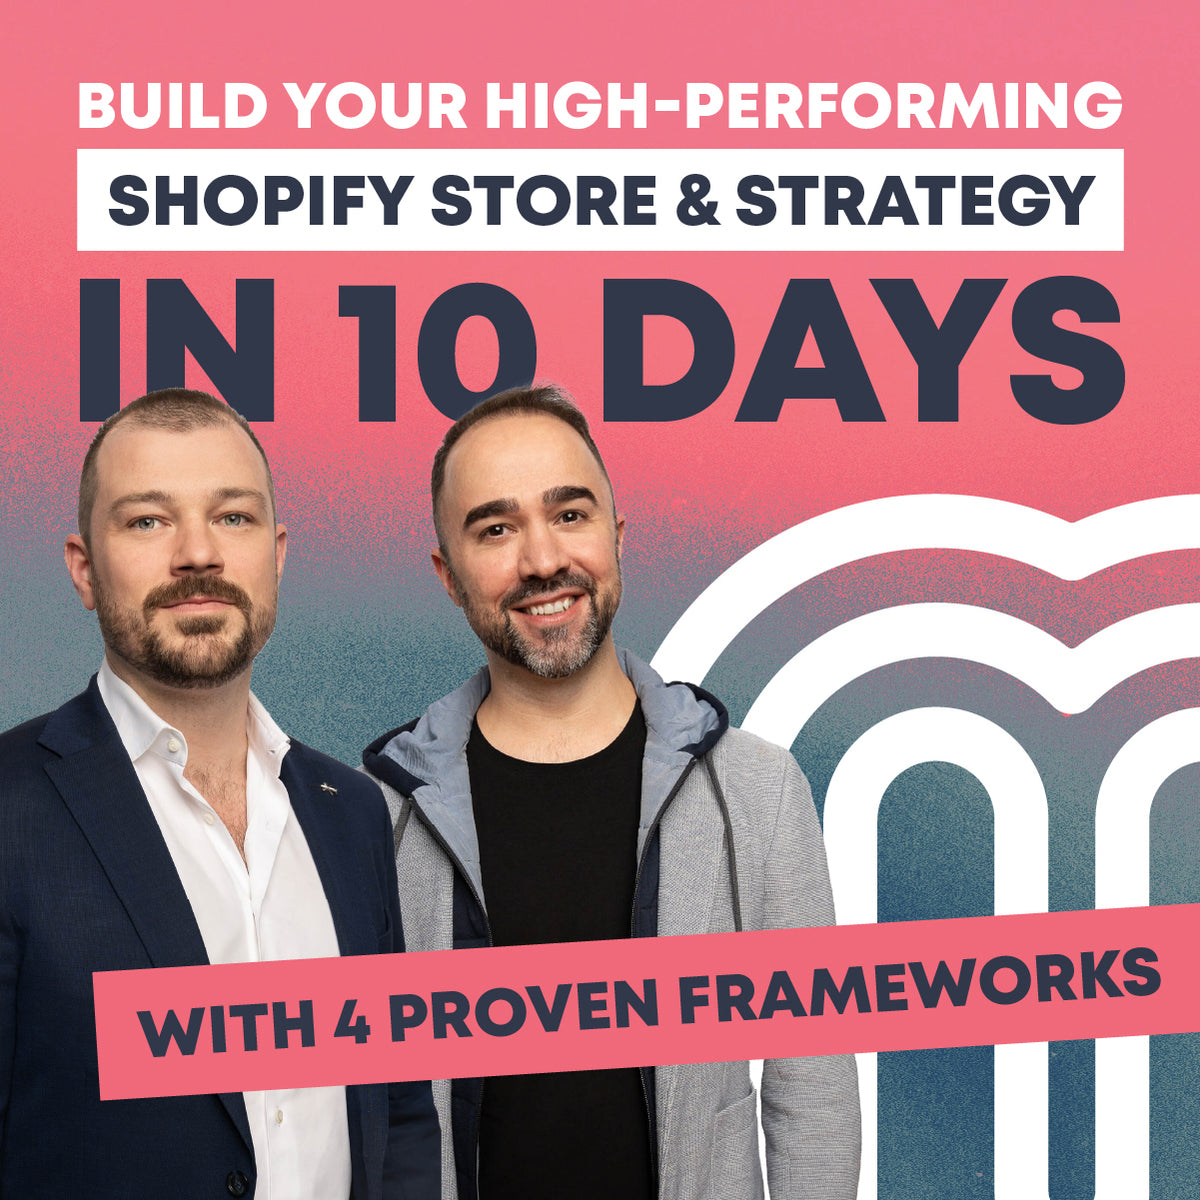 Shopify Starter Kit - Build Your Shopify Store and Strategy in 10 Days